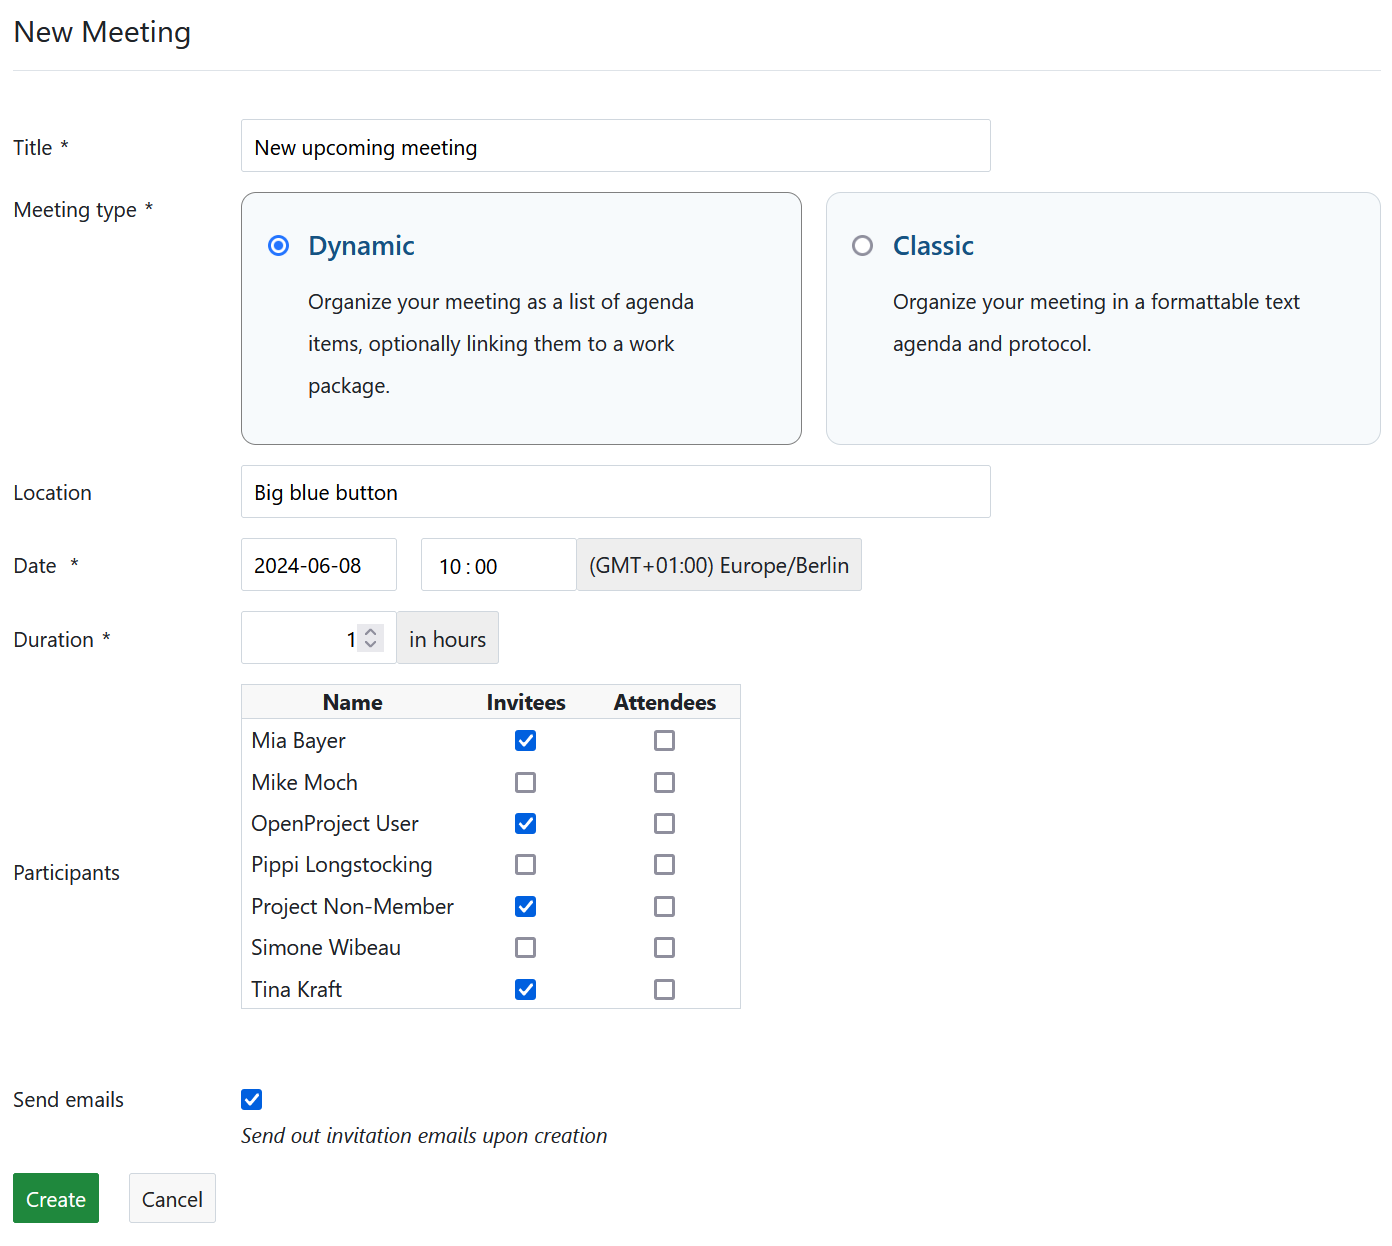 Create new meeting in OpenProject